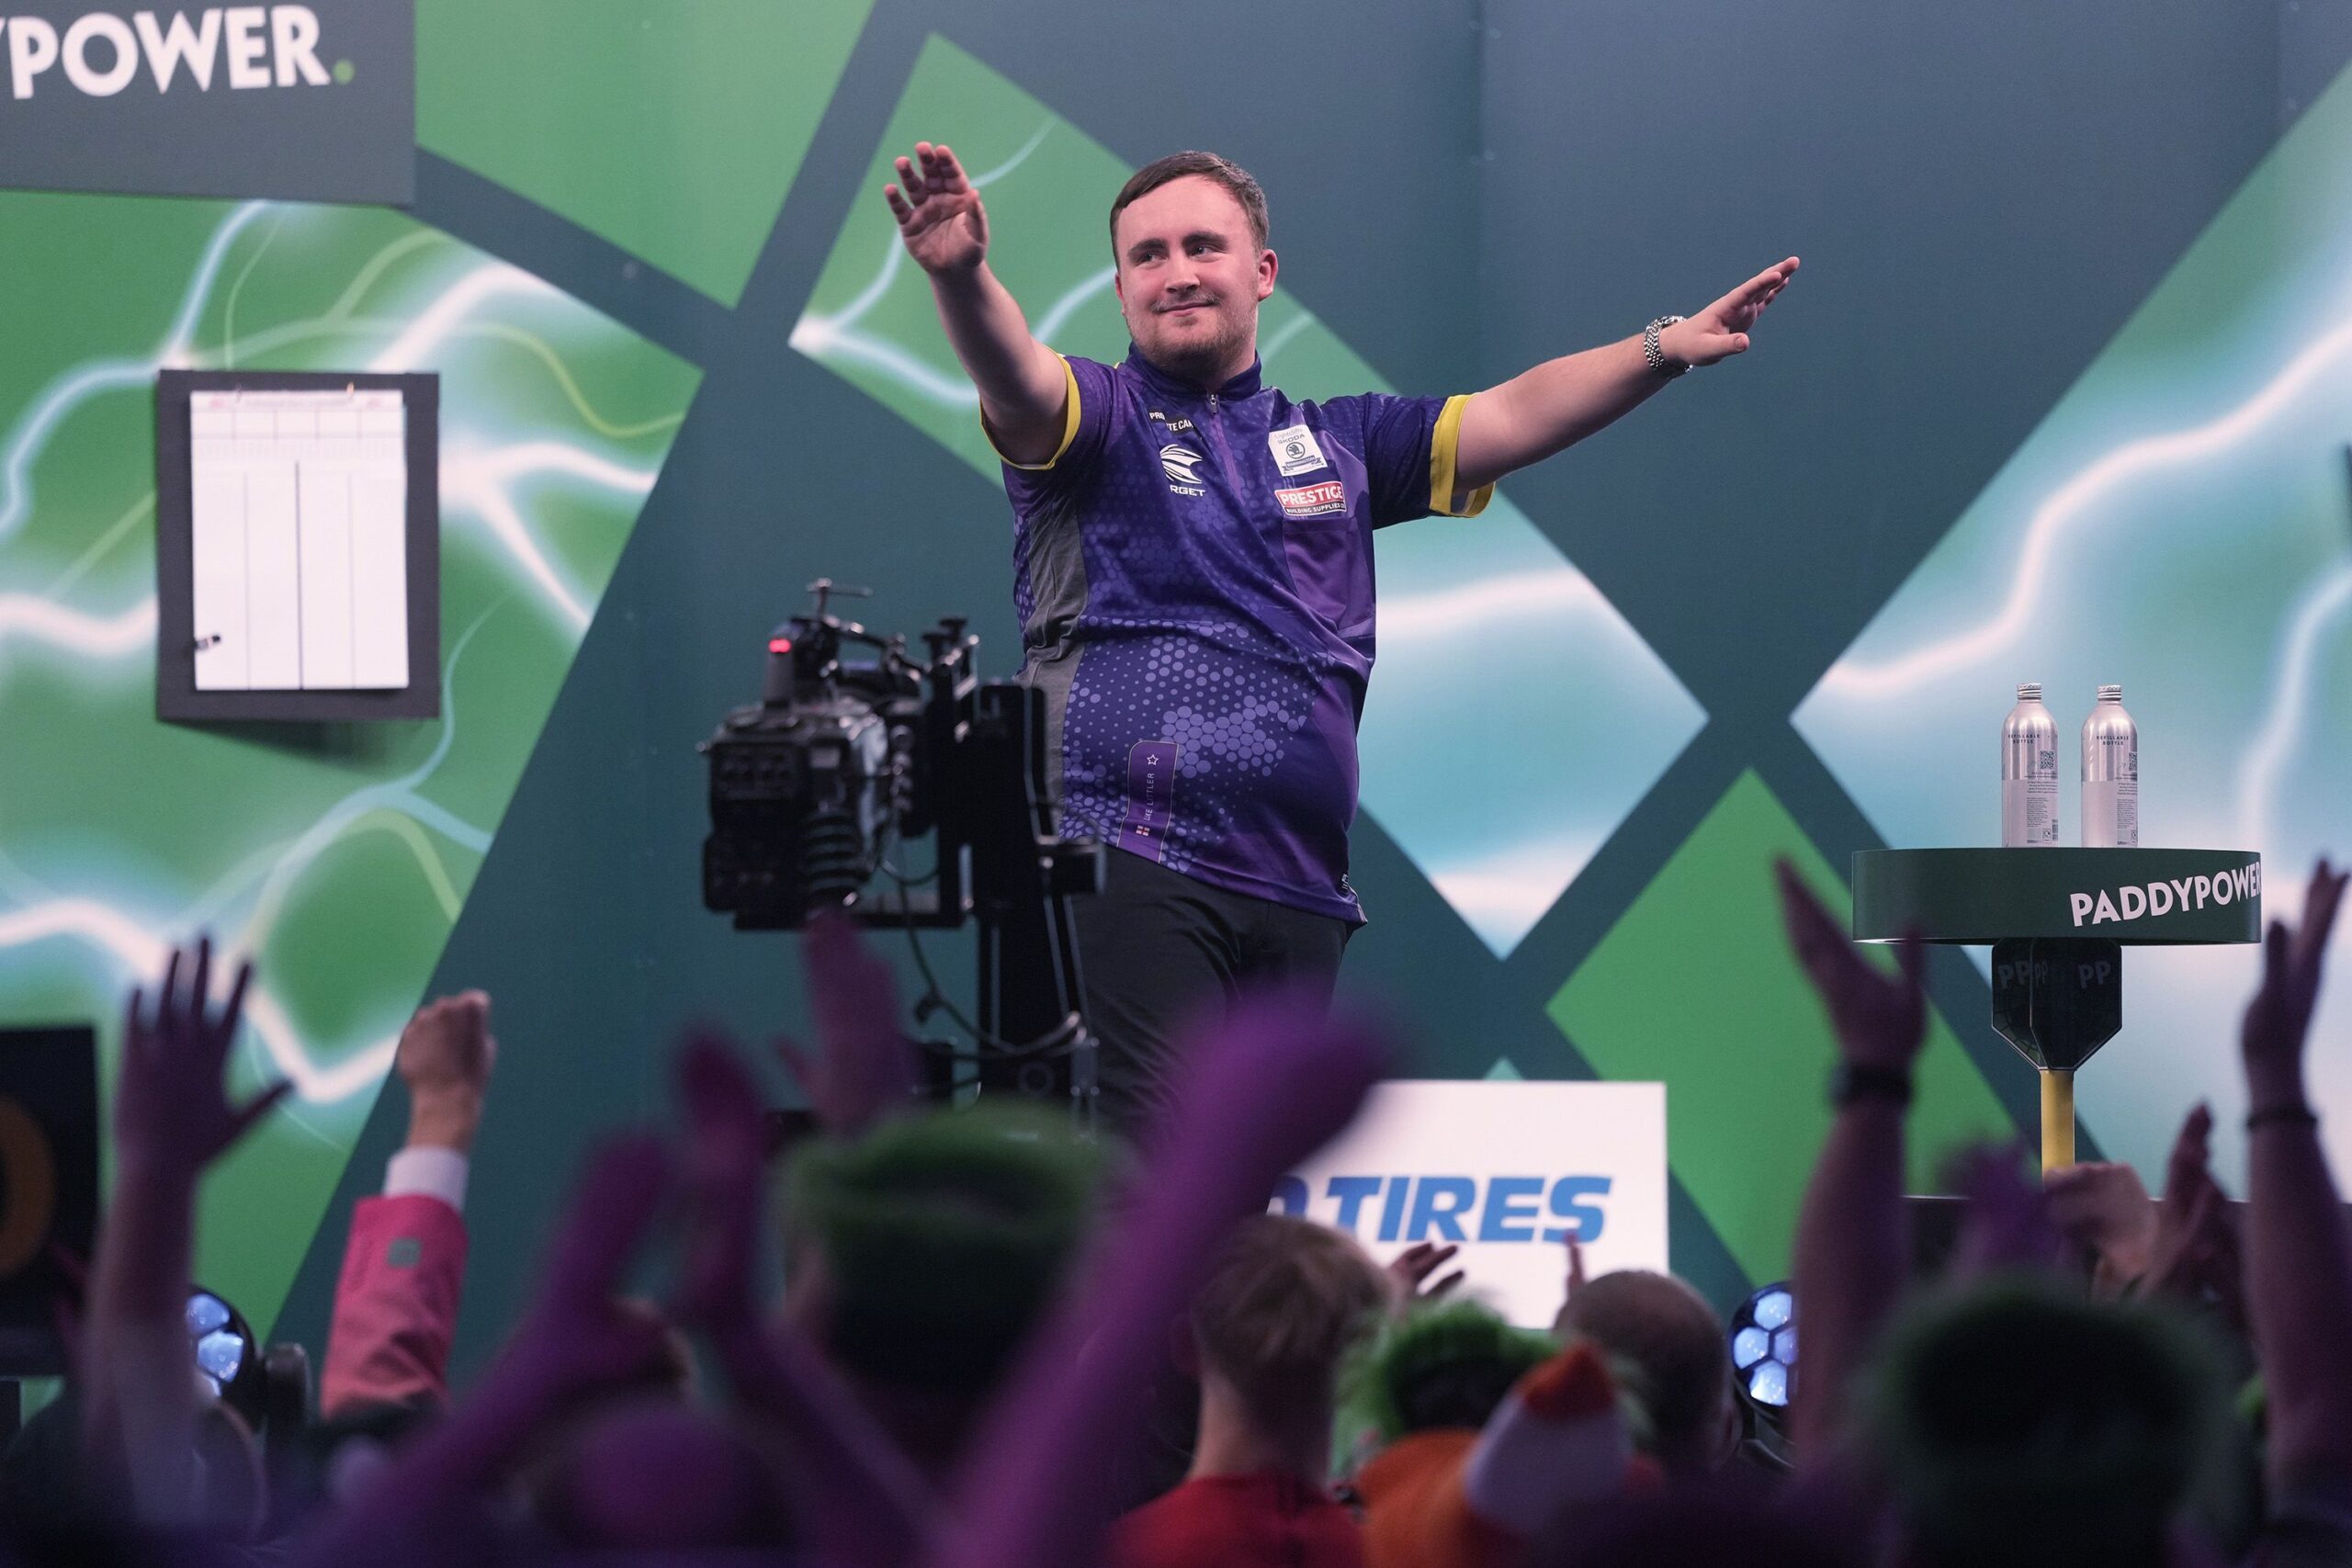 Luke Littler, a teenage phenom, considers his “unbelievable” run after losing in the World Darts Championship final